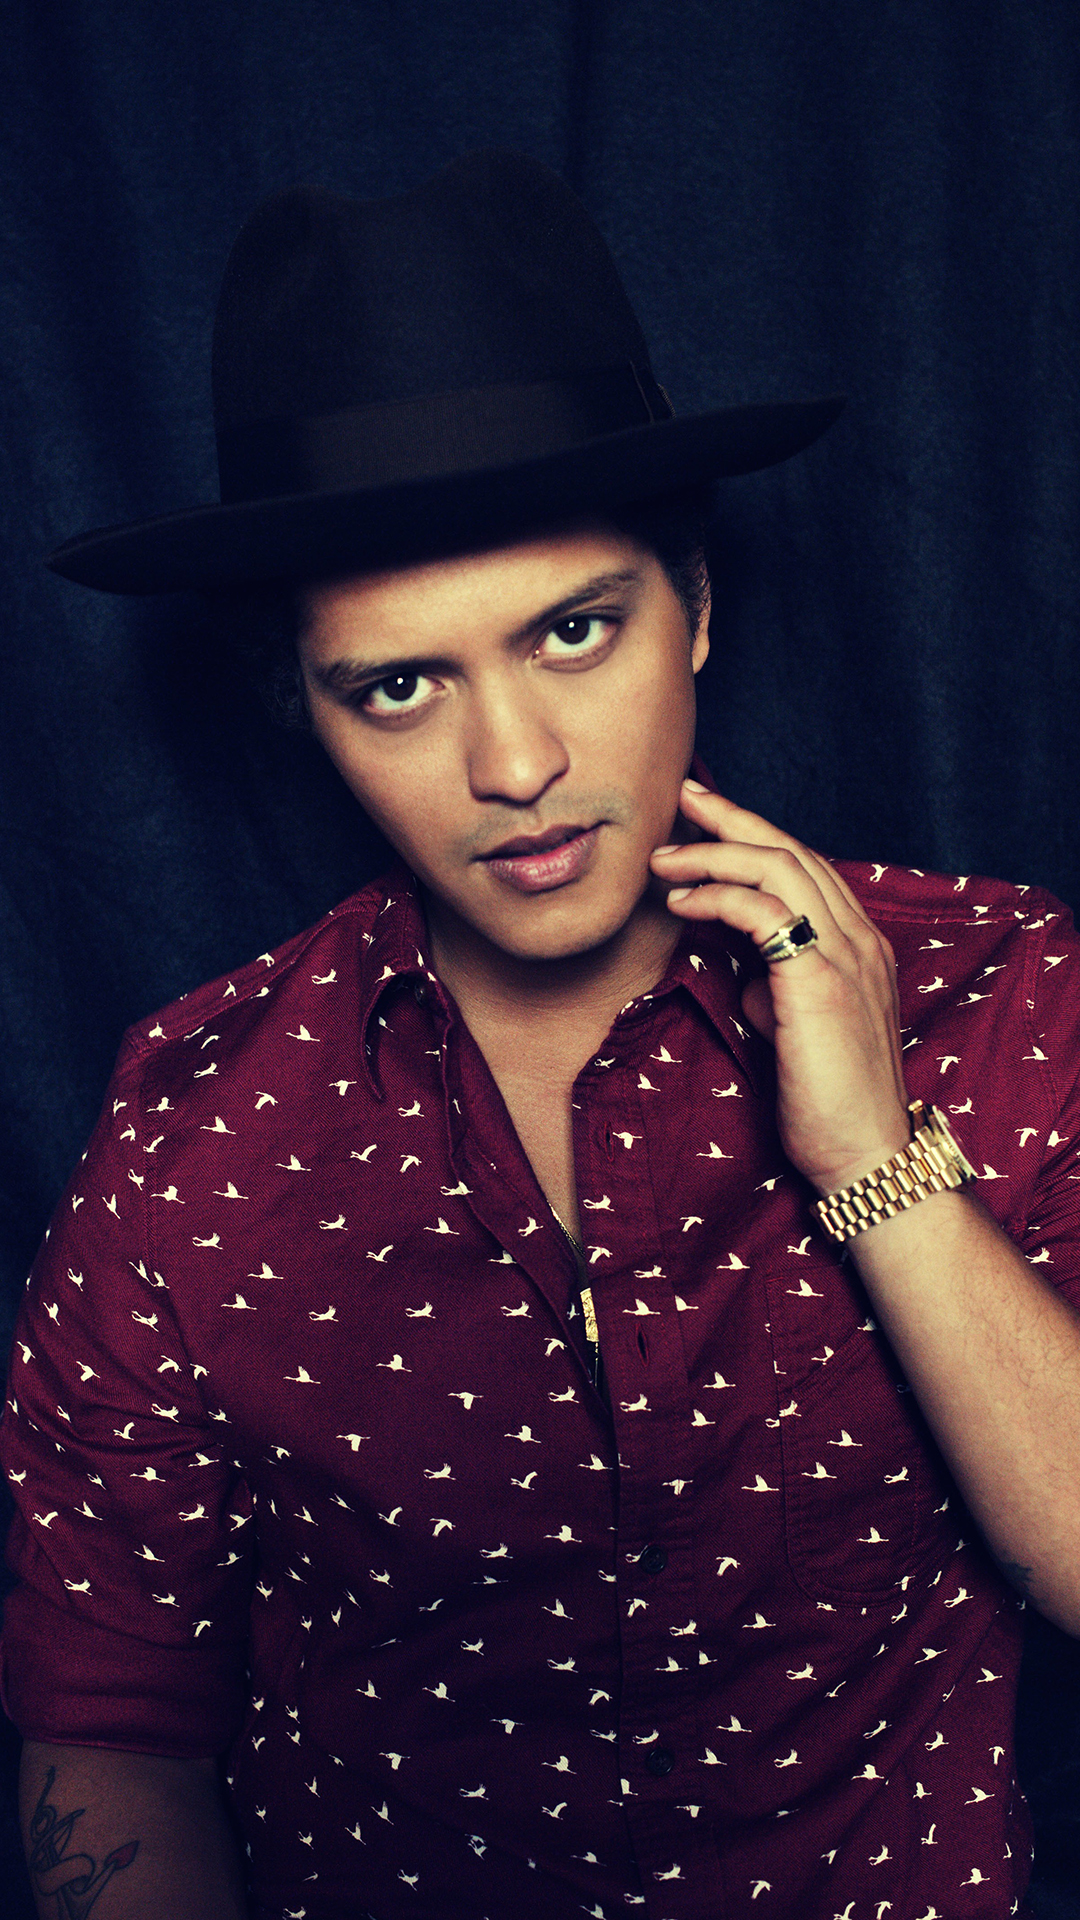 Bruno Mars htc one wallpaper, free and easy to download